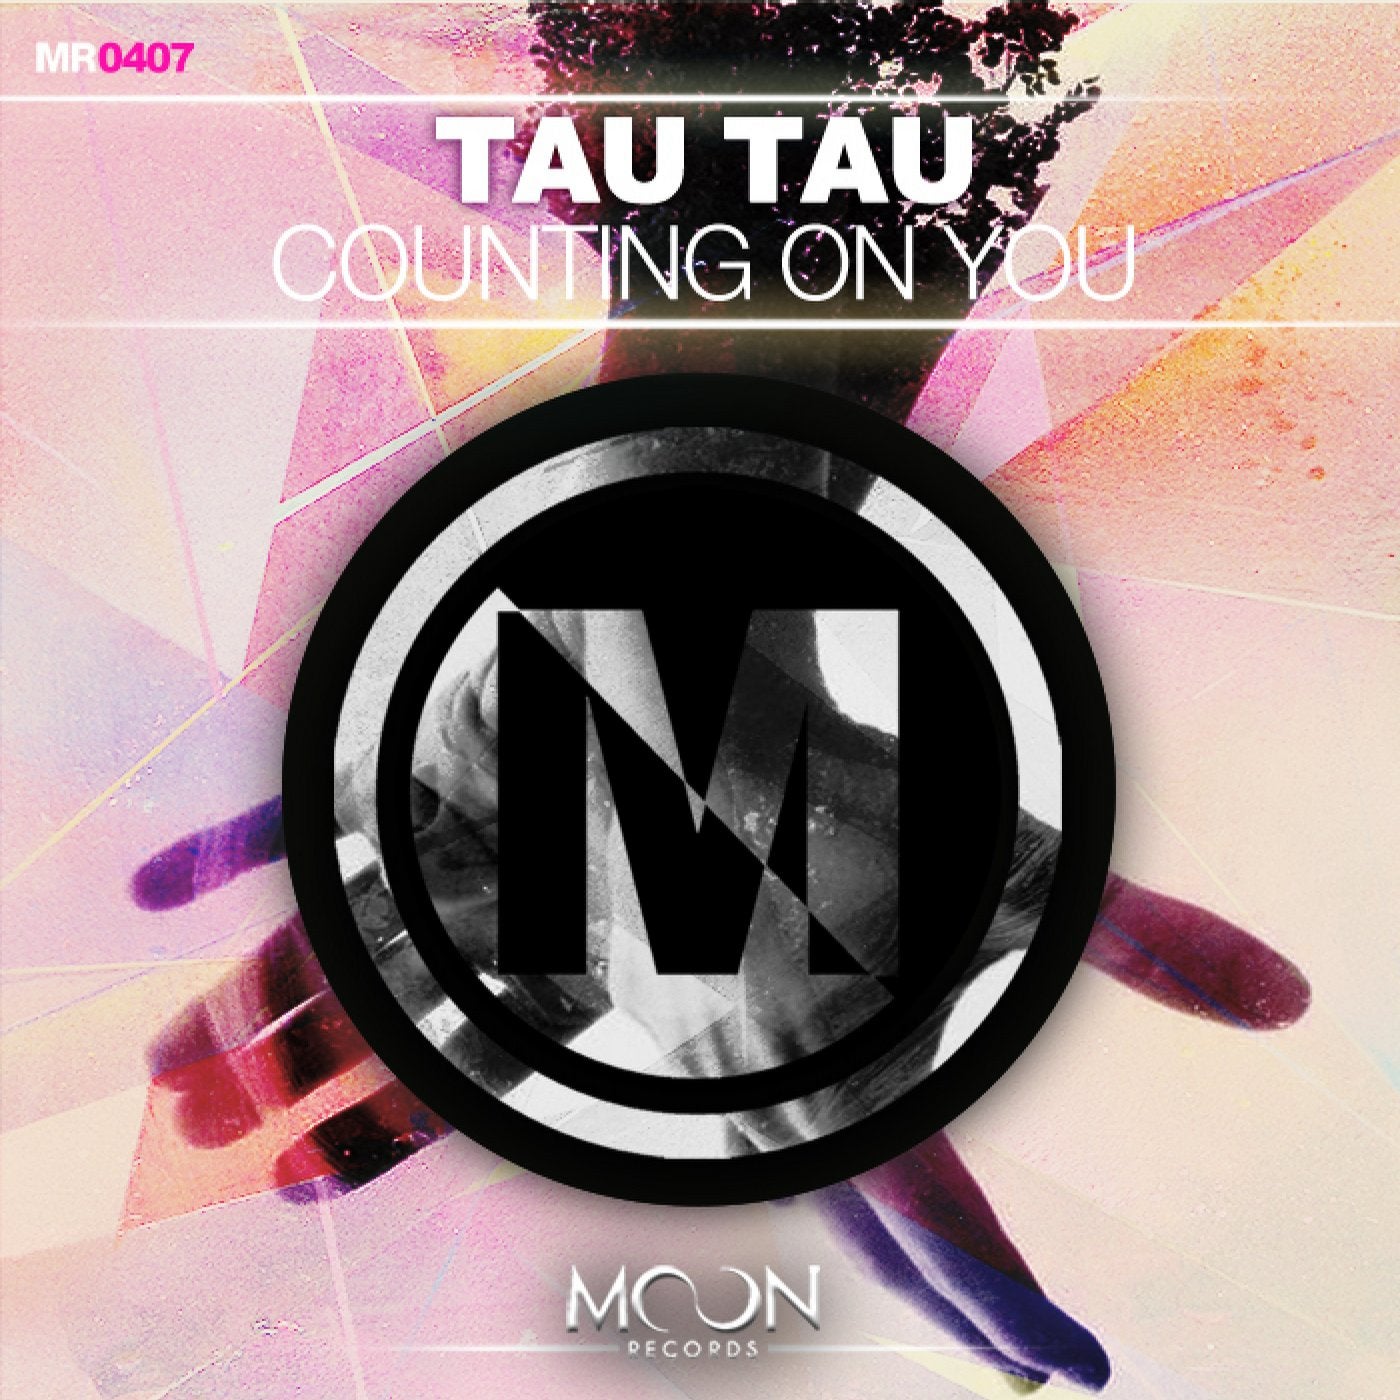 Counting On You (Radio Edit)